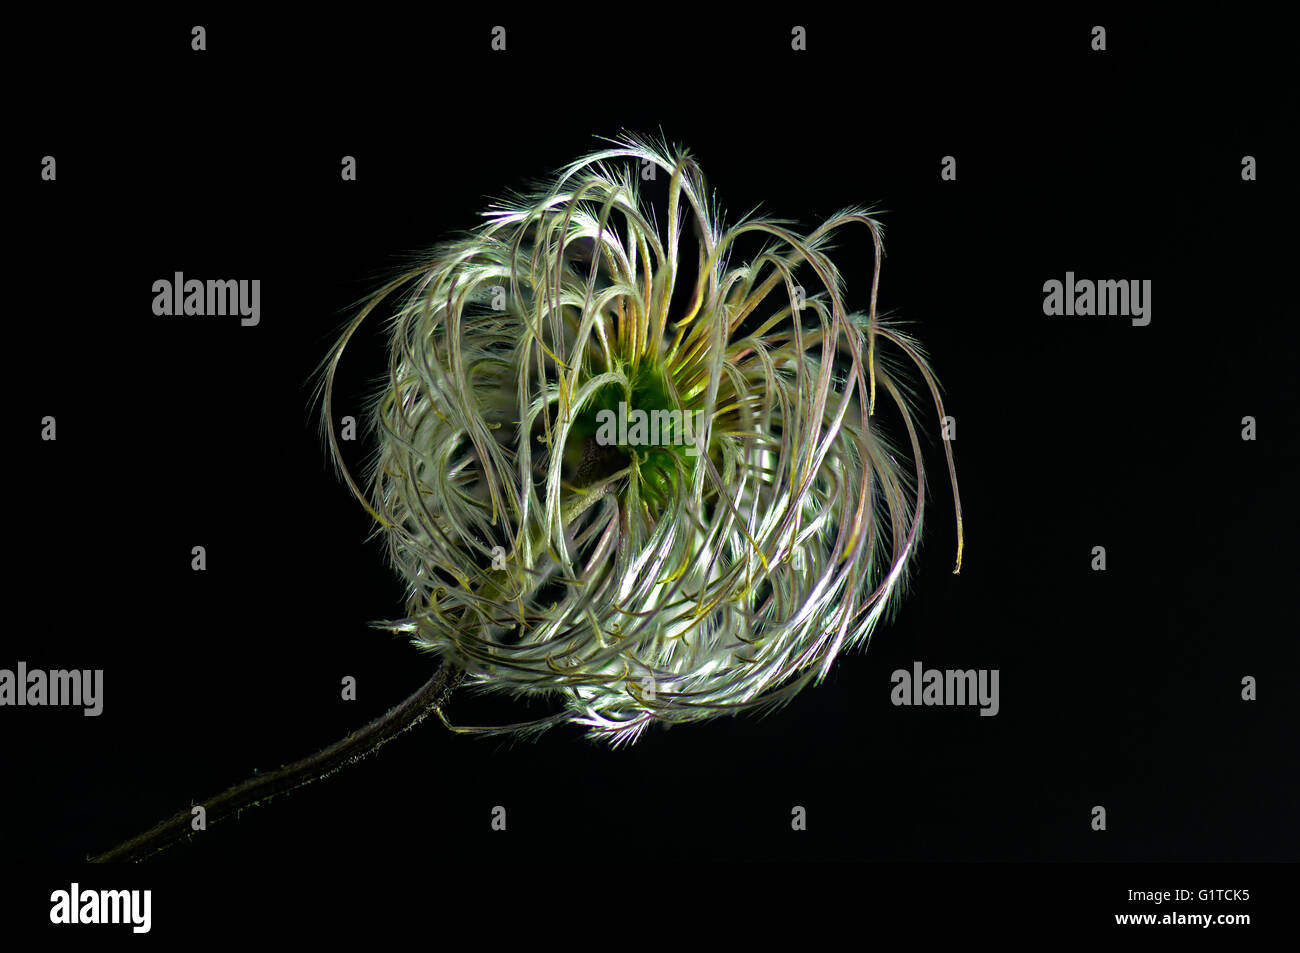 Clematis Seed Head Stock Photo